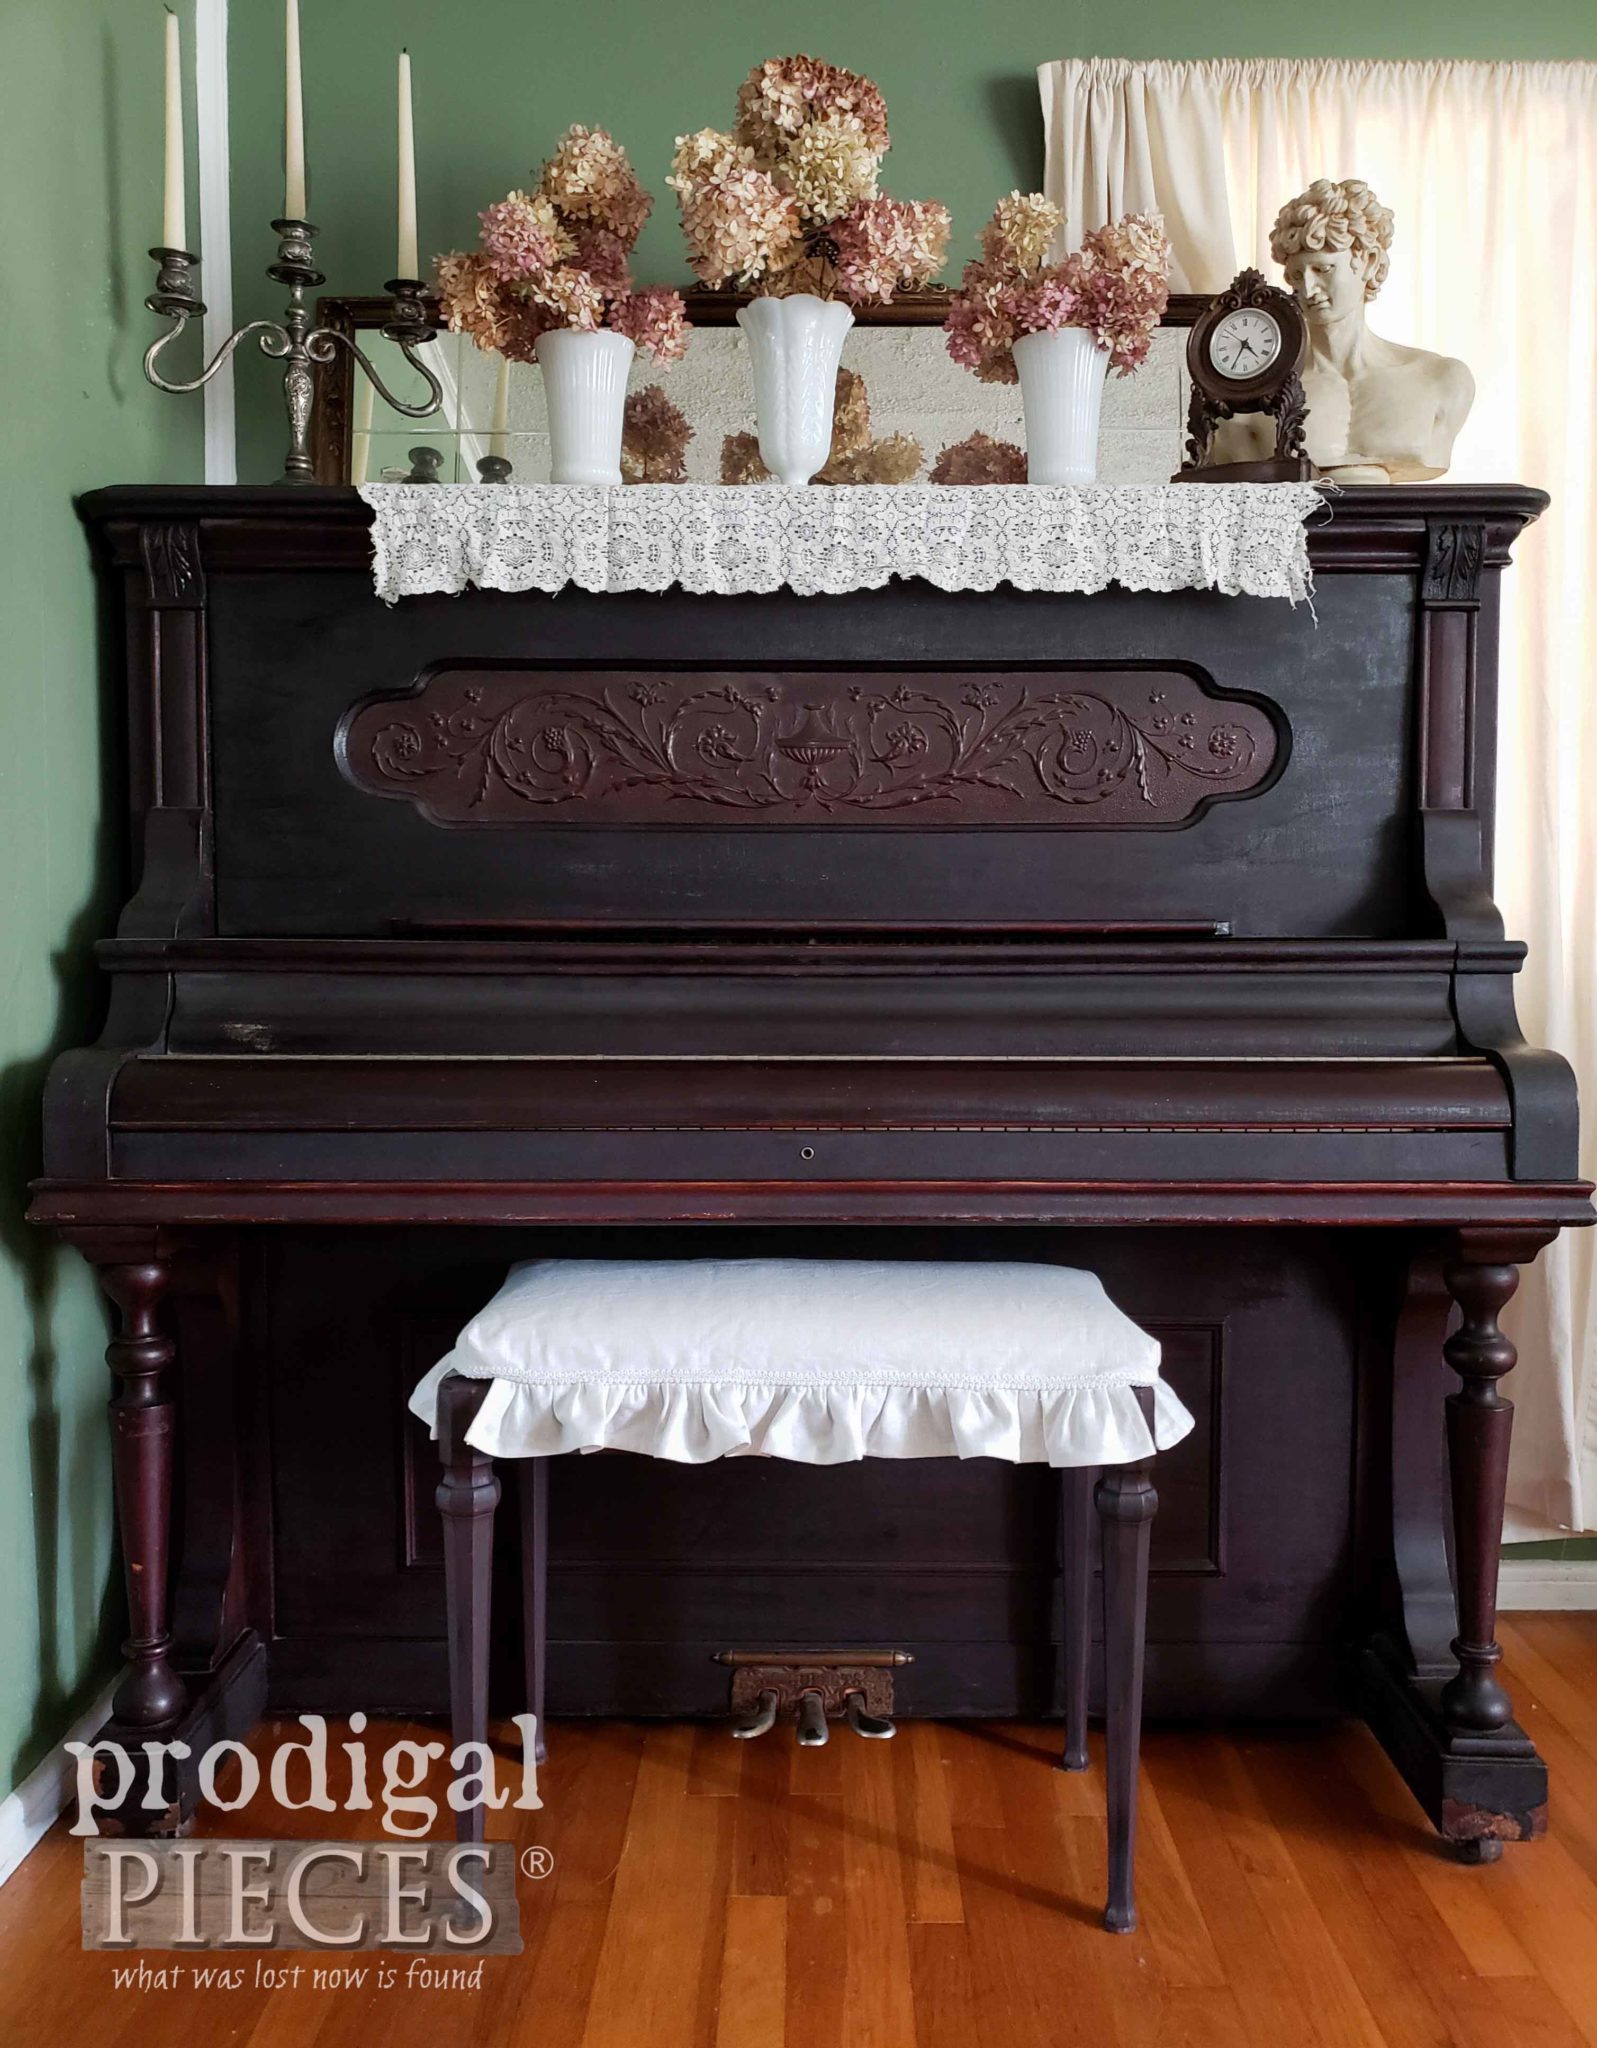 Ornate Antique Upright Grand Piano with Linen Upholstered Piano Bench by Larissa of Prodigal Pieces | prodigalpieces.com